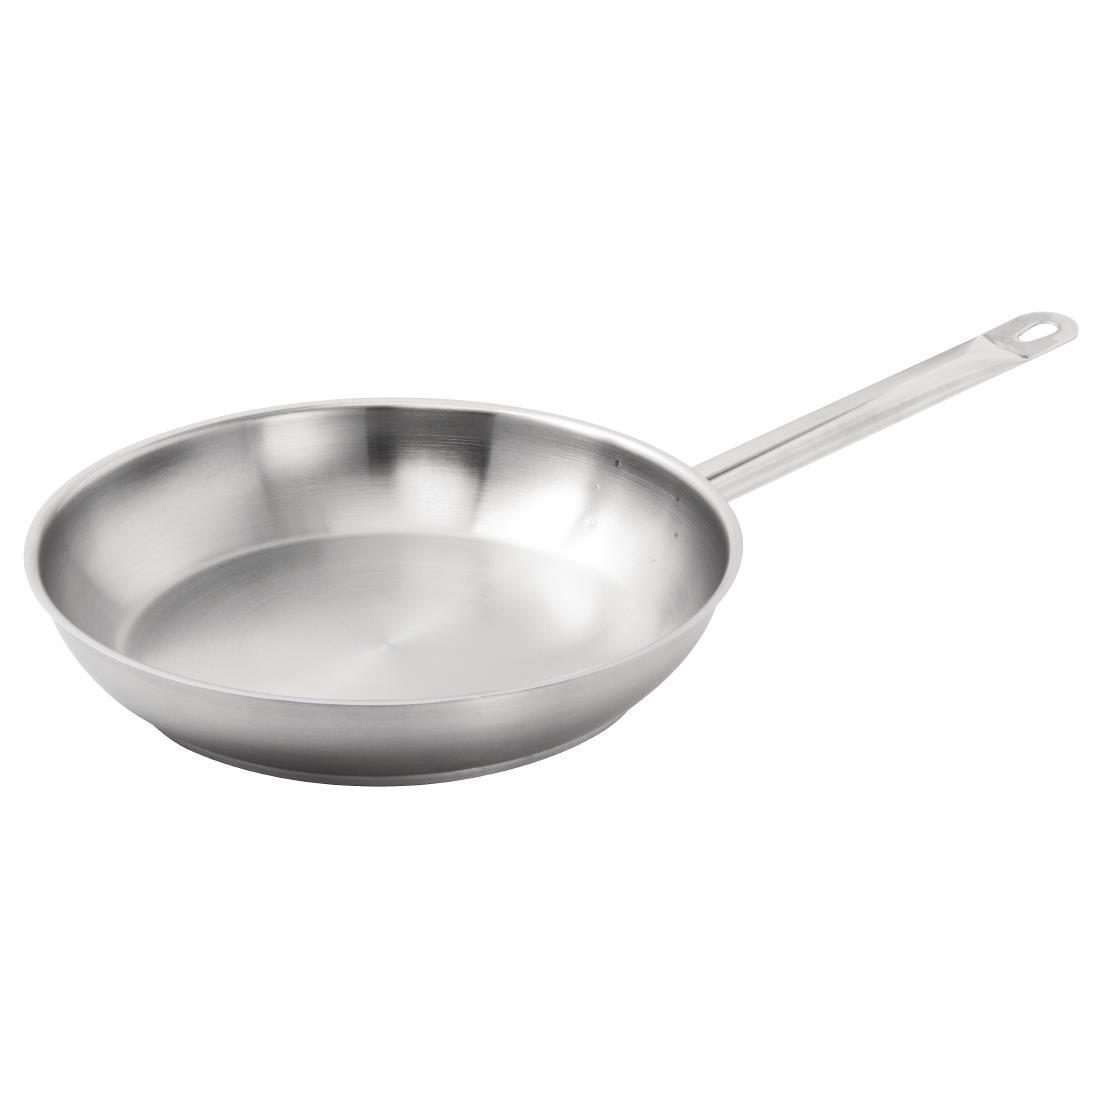 Vogue Stainless Steel Induction Frying Pan 280mm - M926  - 2